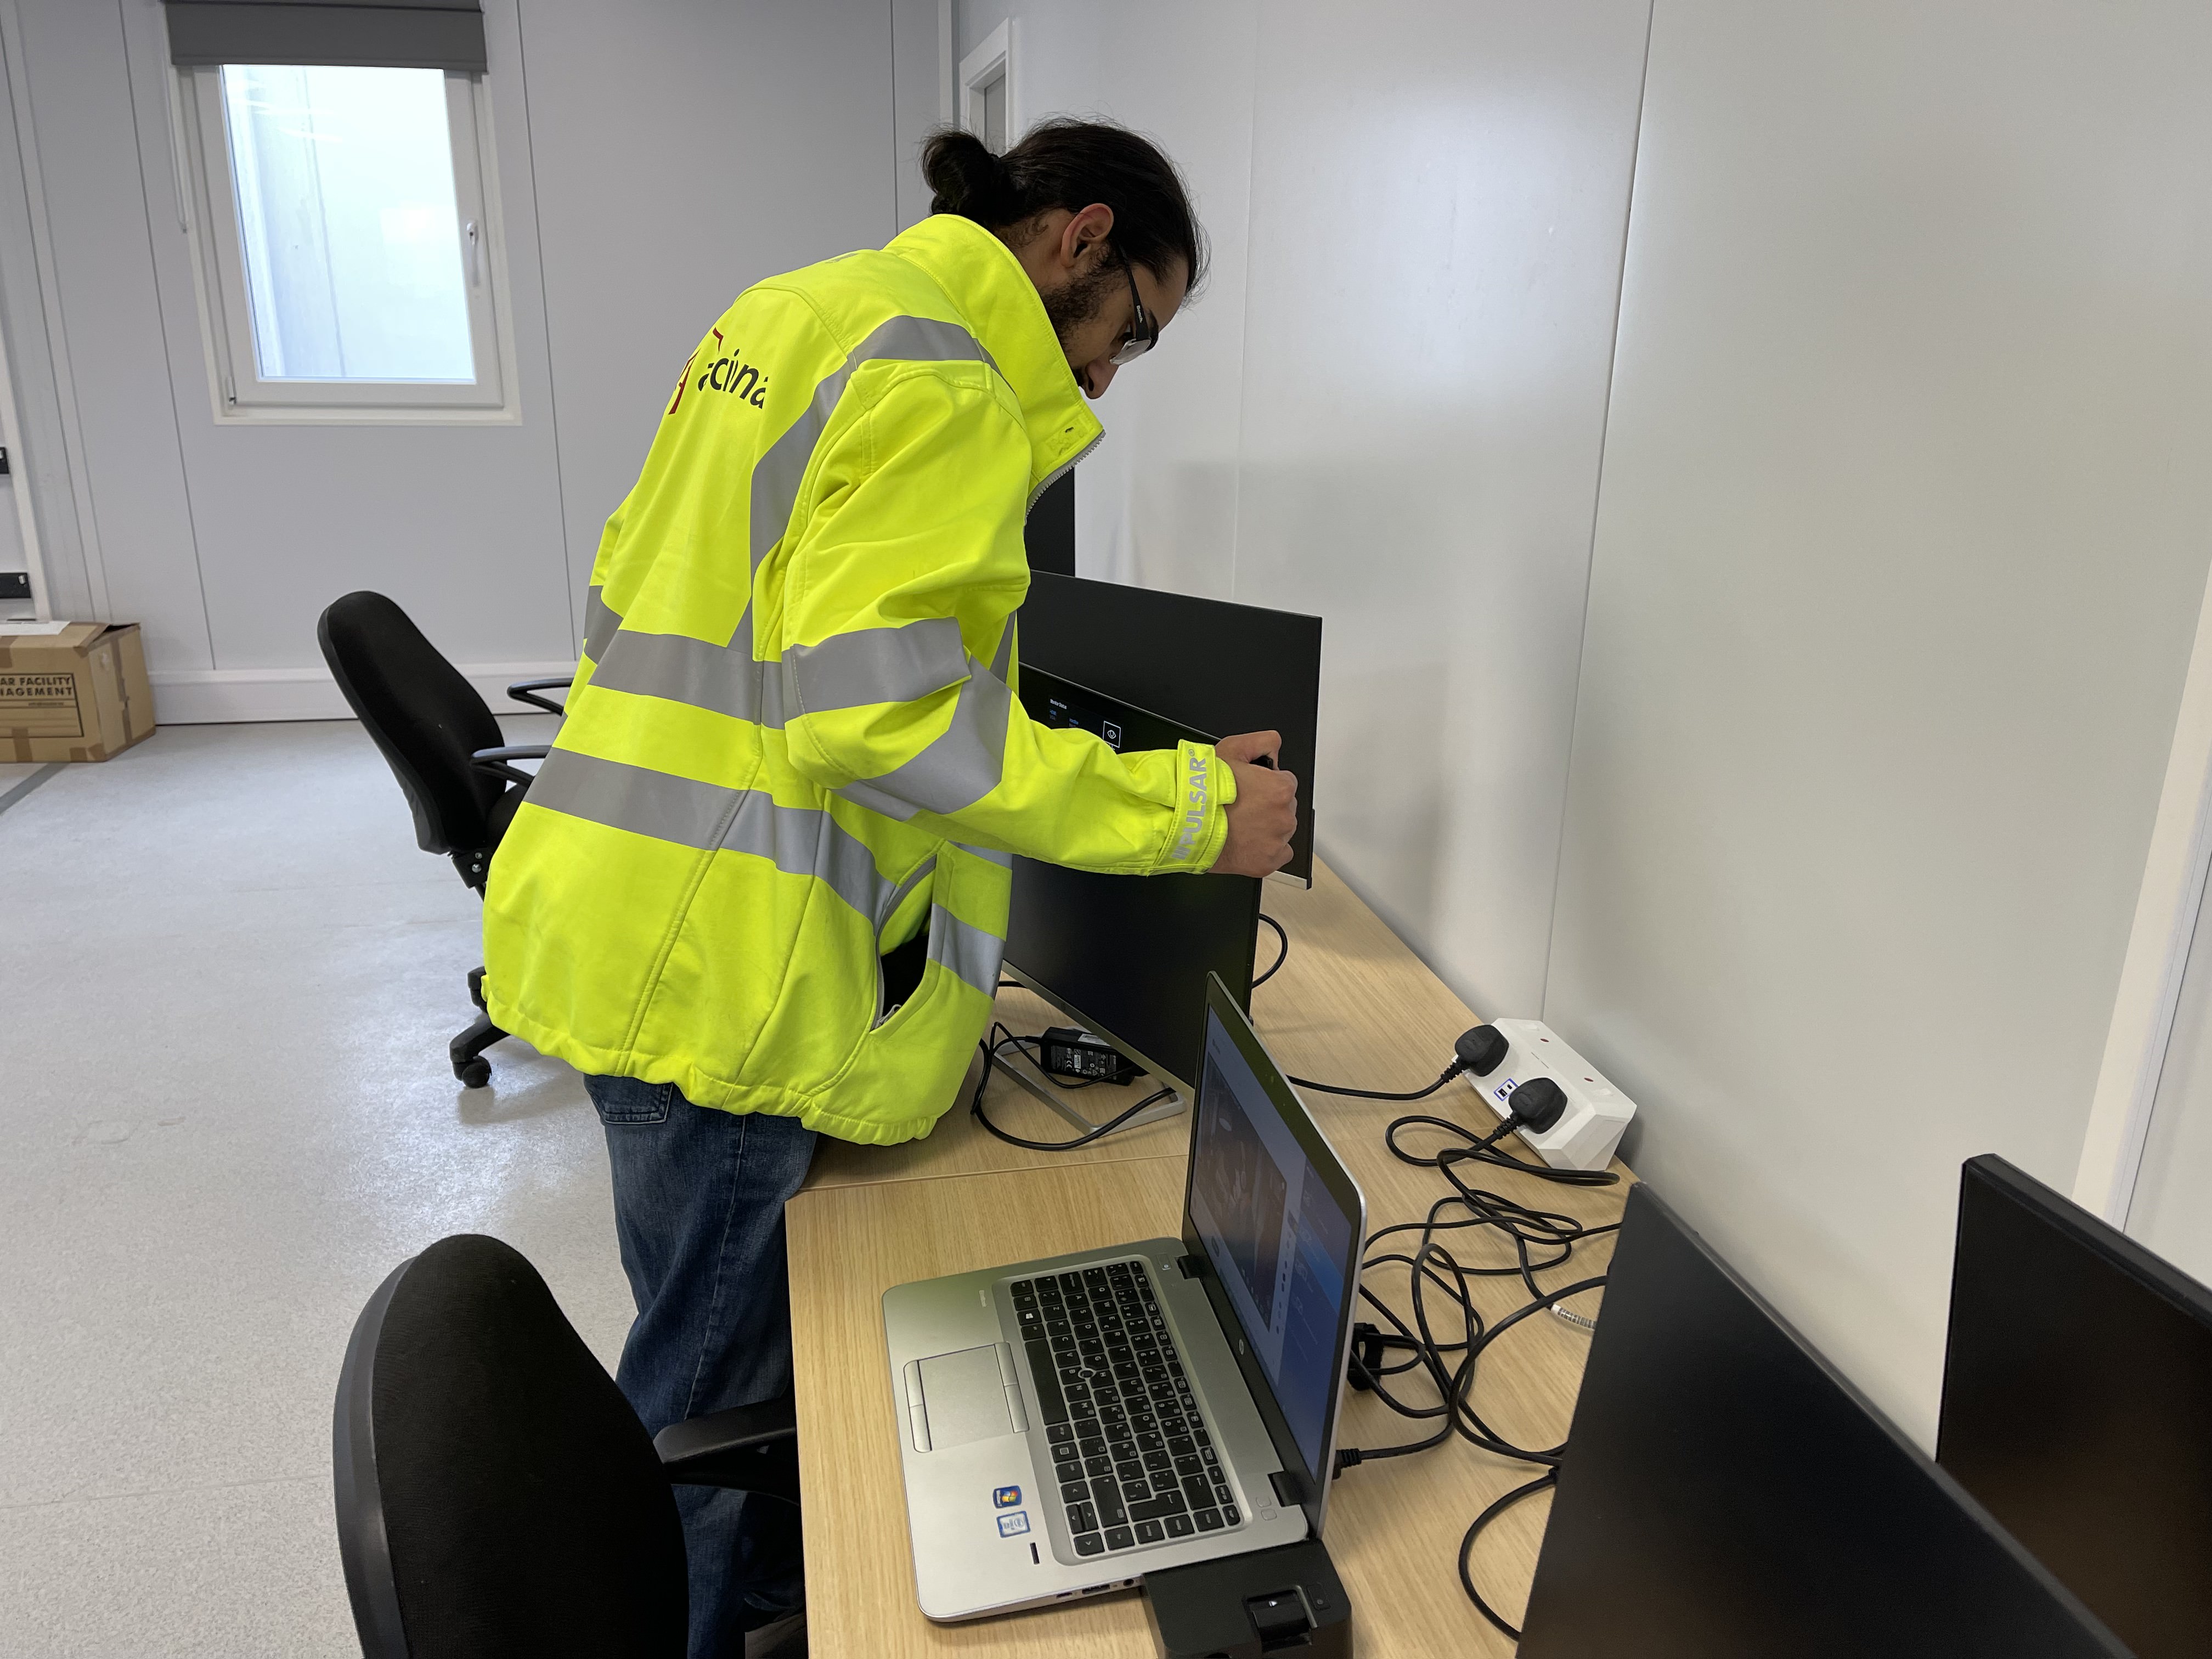 Suliman joined the NLHPP this month working with ACCIONA's IT subcontractor through the Construction Skills Bootcamp programme